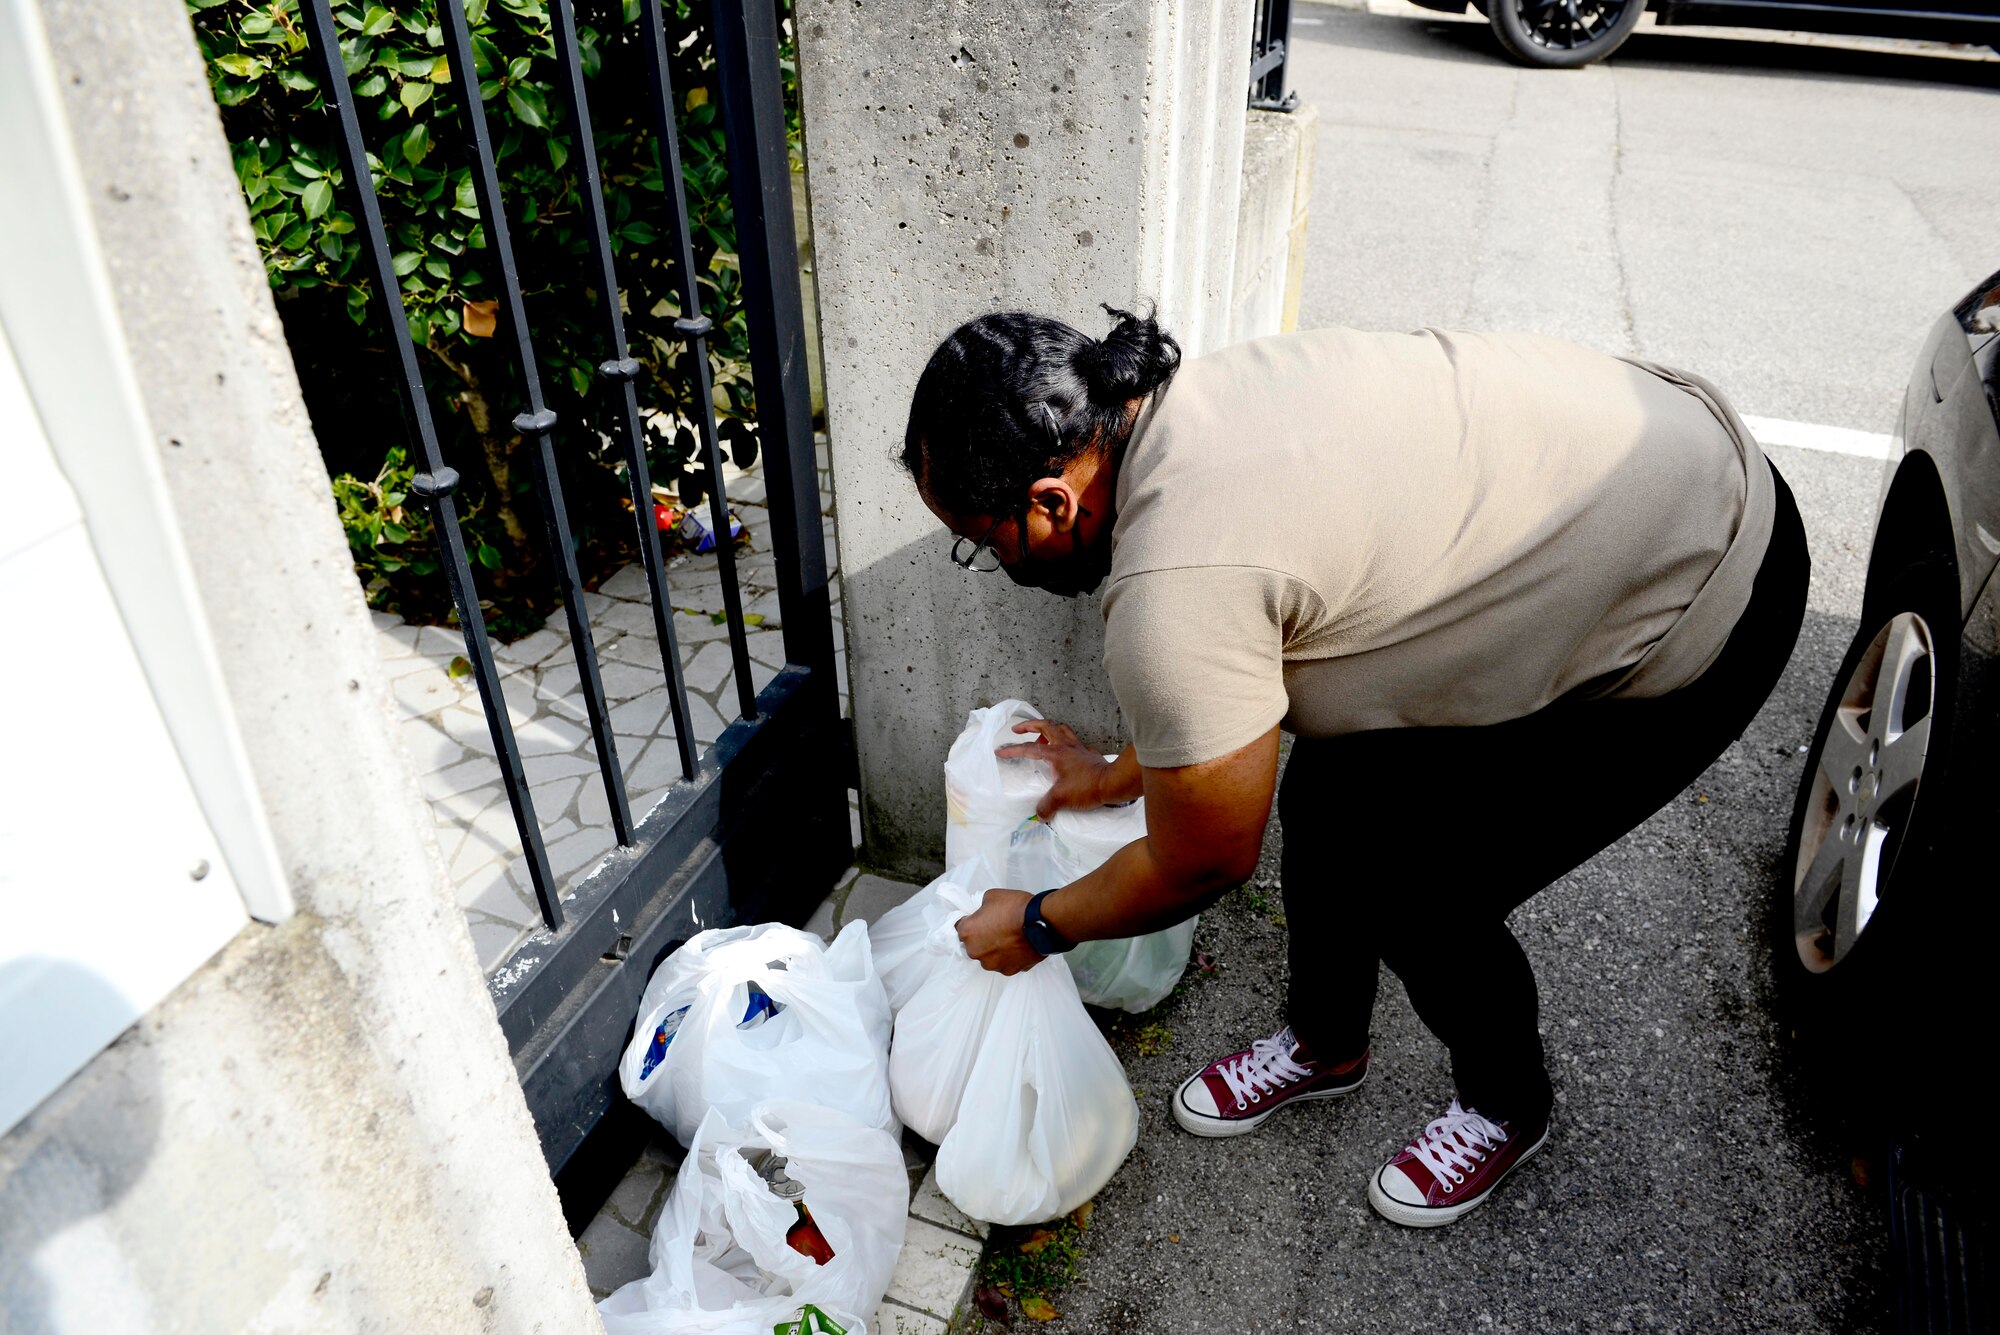 U.S. Air Force Tech. Sgt. Kahlia Rainer, volunteer, drops groceries off at the front gate of a home outside Aviano Air Base, Italy, April 18, 2020. The recipient was the spouse of an active duty member unable to shop with her children due to movement restrictions put in place by the Italian government to help battle COVID-19. (U.S. Air Force photo by Tech. Sgt. Tory Cusimano)